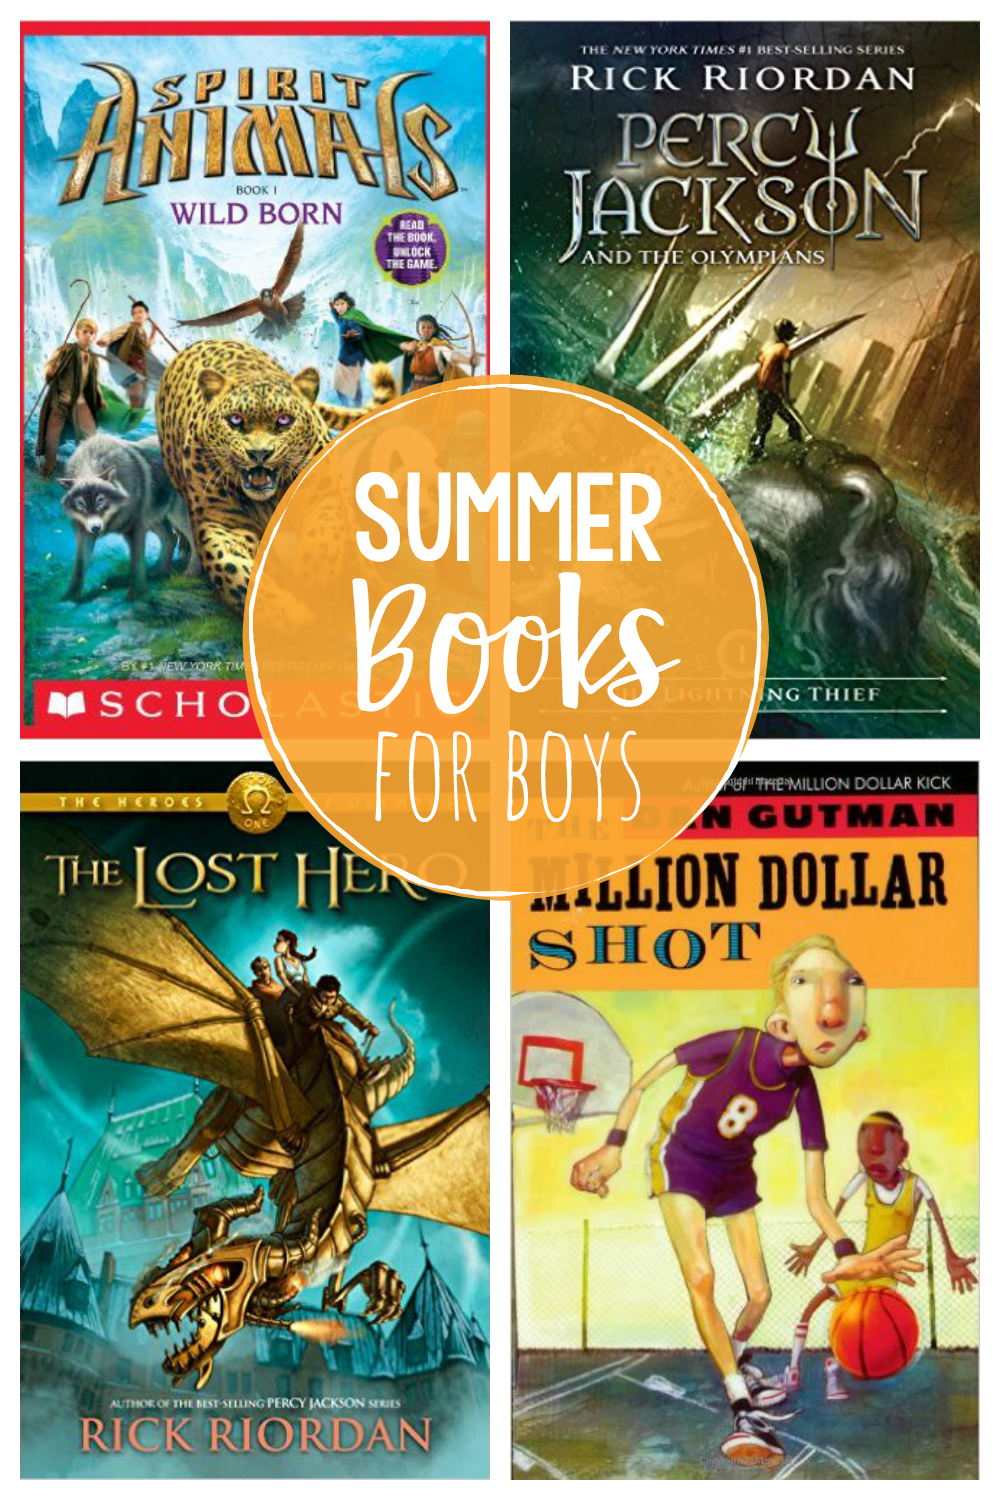 Great Summer Books for Boys-This summer reading ideas for boys are kid tested and approved as great books to read this summer! #summer #summerreading #boys #kids